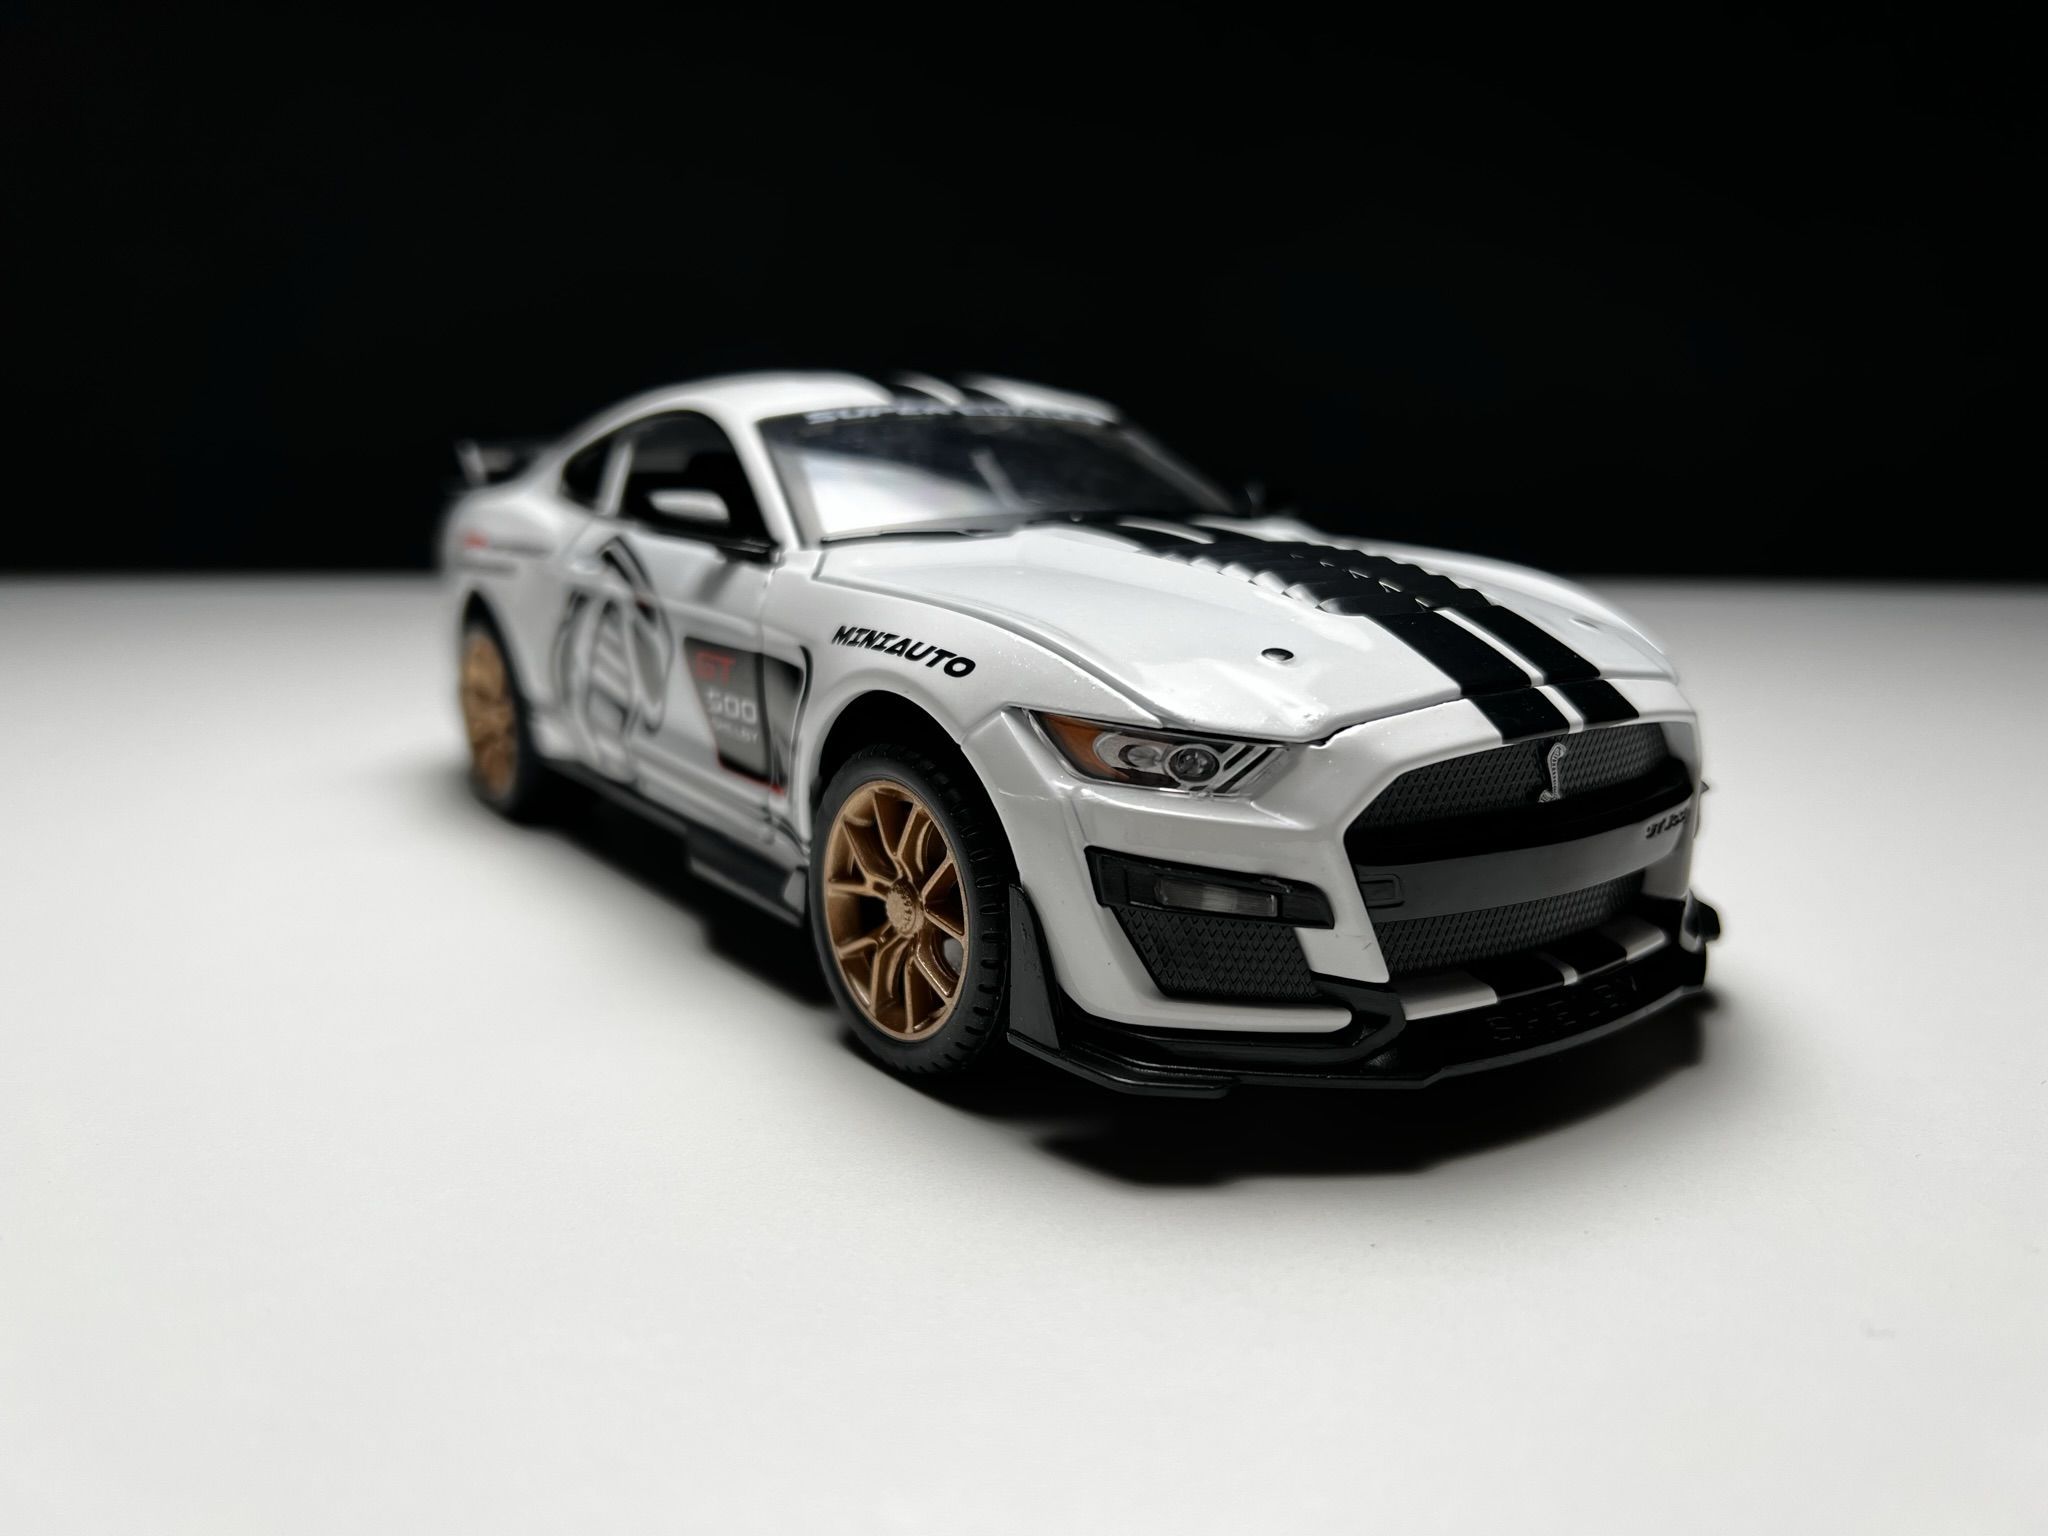 Машинка металлическая Элемент Ford Mustang Shelby 1:24 машинка металлическая элемент bmw m8 дпс 1 24